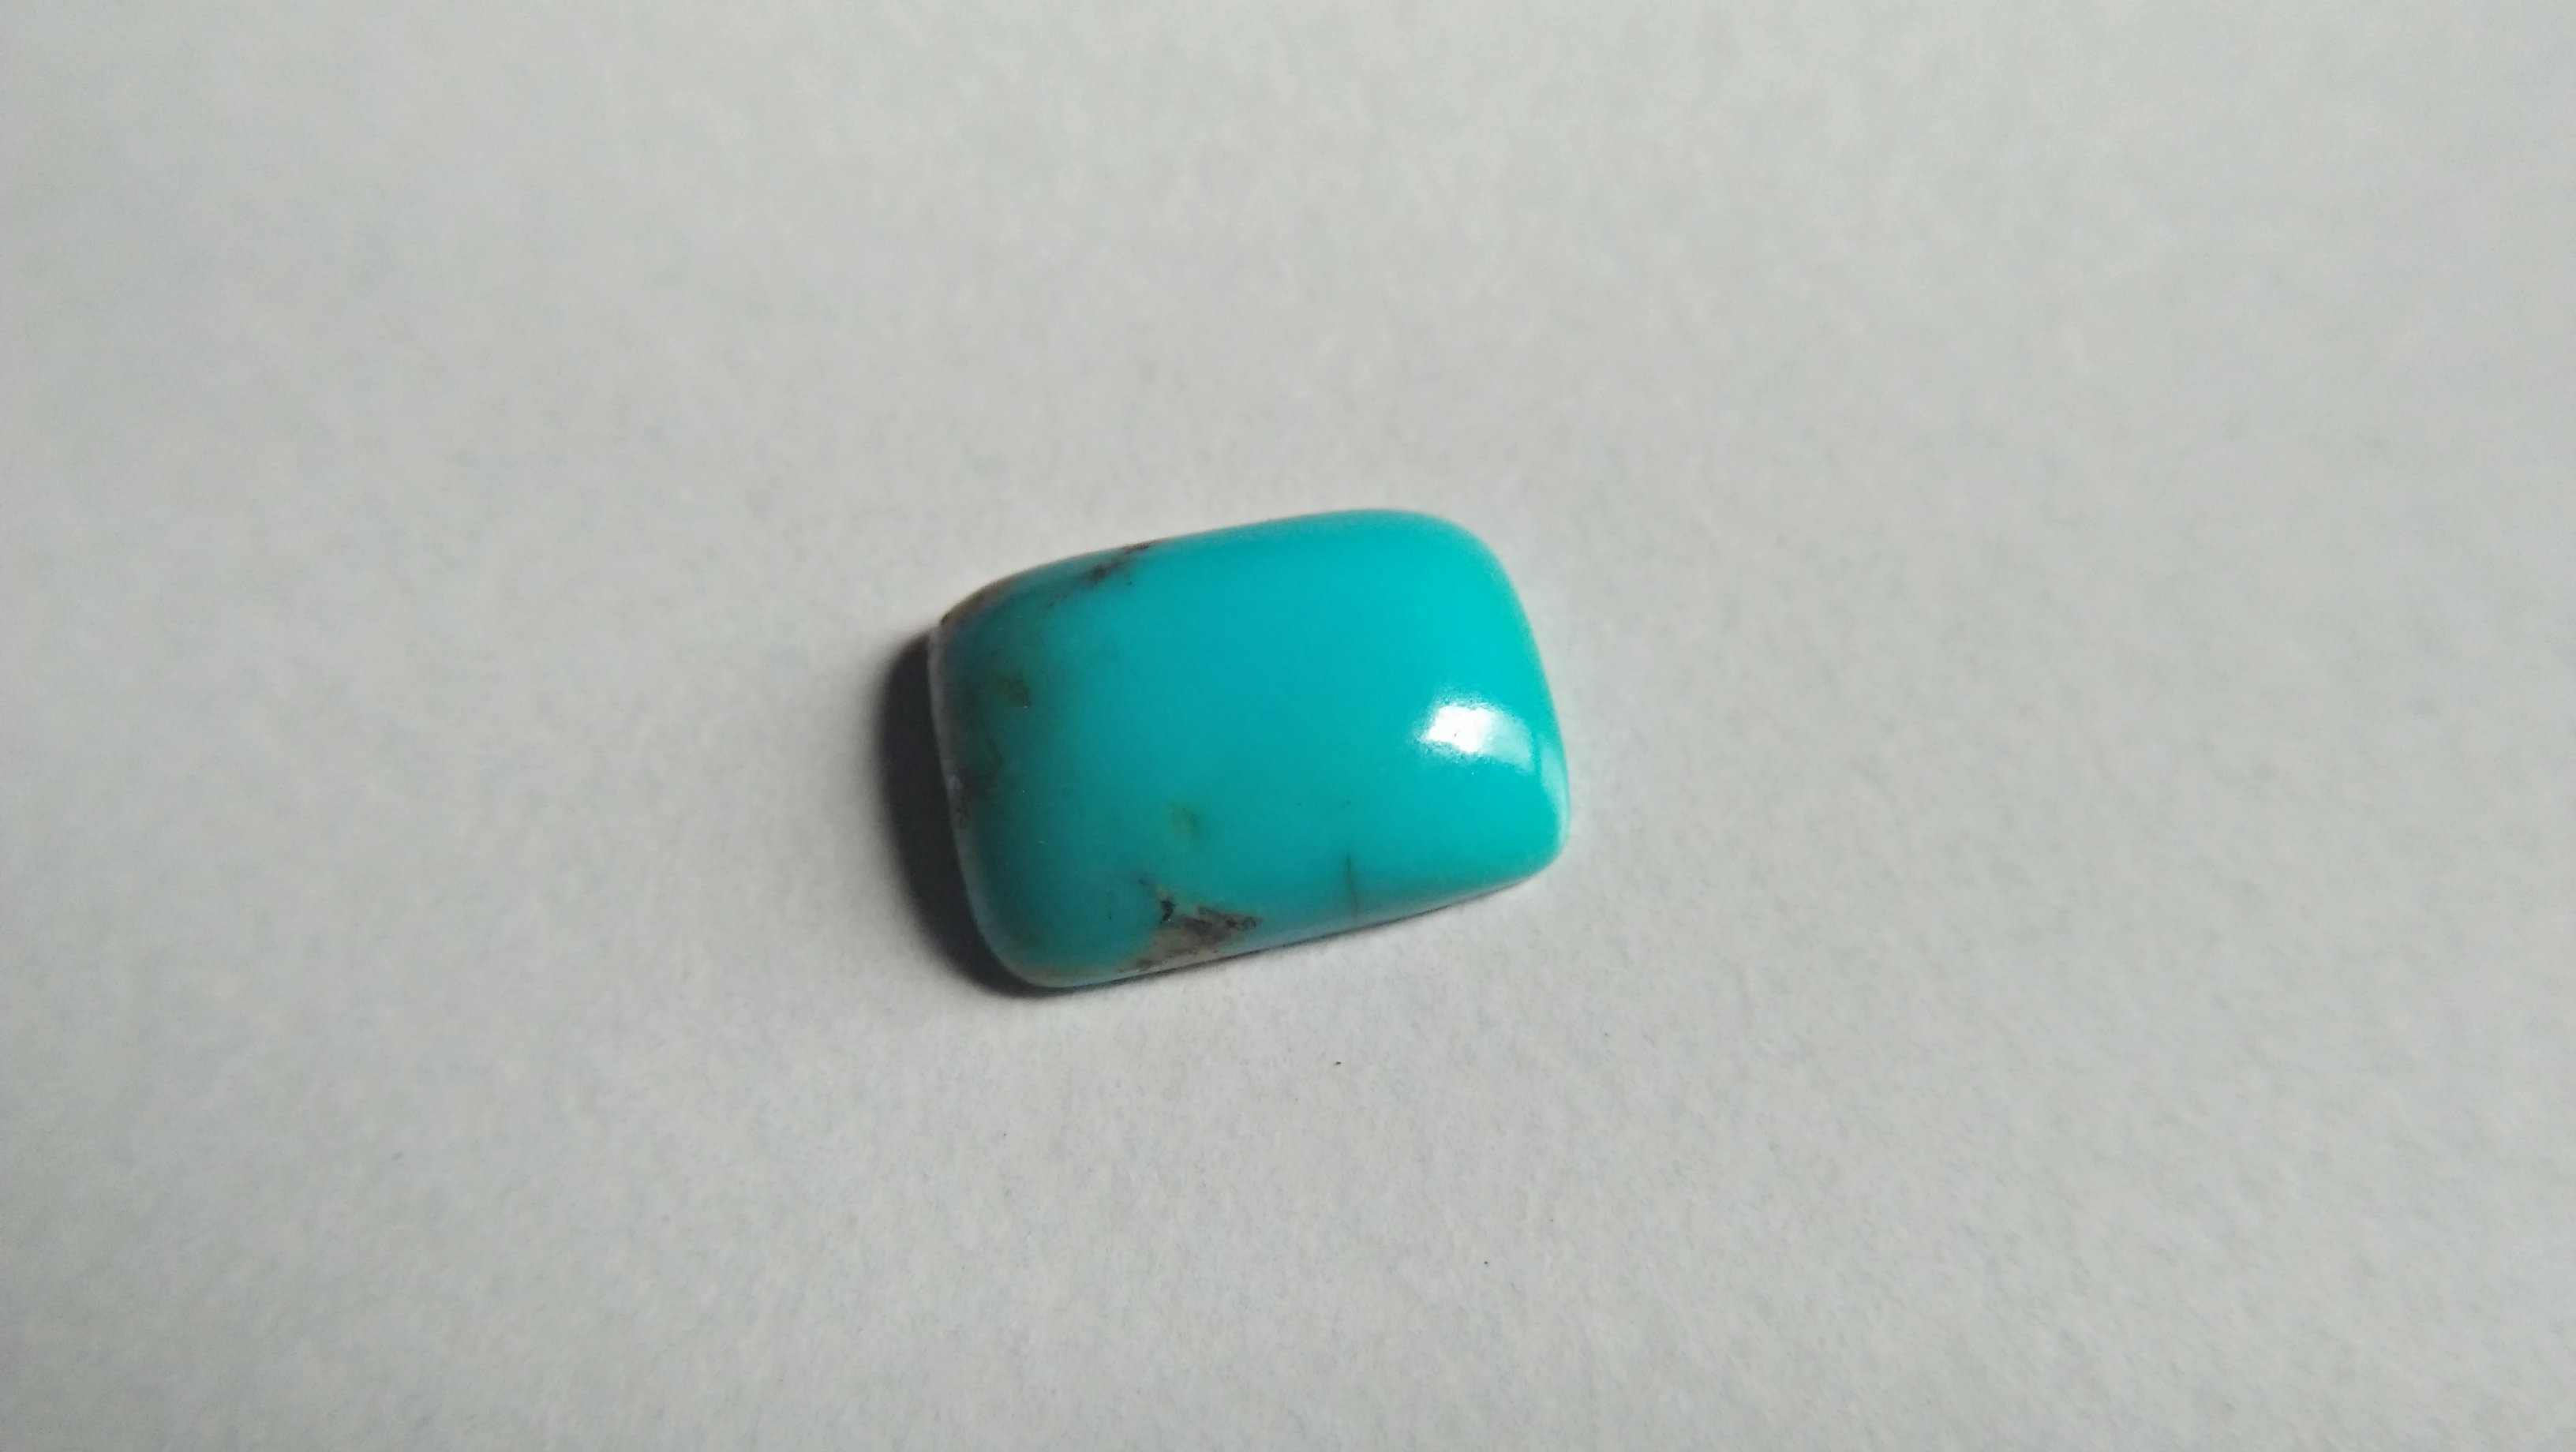 Natural Torquoise 11.5mm x 8mm x 3.5 mm dimension super healing stone for Headaches 🌍 Turquoise is an opaque, blue-to-green mineral that is a hydrated phosphate of copper and aluminium, with the chemical formula CuAl₆(PO₄)₄(OH)₈·4H₂O. In Western culture, turquoise is also the traditional birthstone for those born in the month of December. In many cultures of the Old and New Worlds, this gemstone has been esteemed for thousands of years as a holy stone, a bringer of good fortune or a talisman. The oldest evidence for this claim was found in Ancient Egypt, where grave furnishings with turquoise inlay were discovered, dating from approximately 3000 BCE.